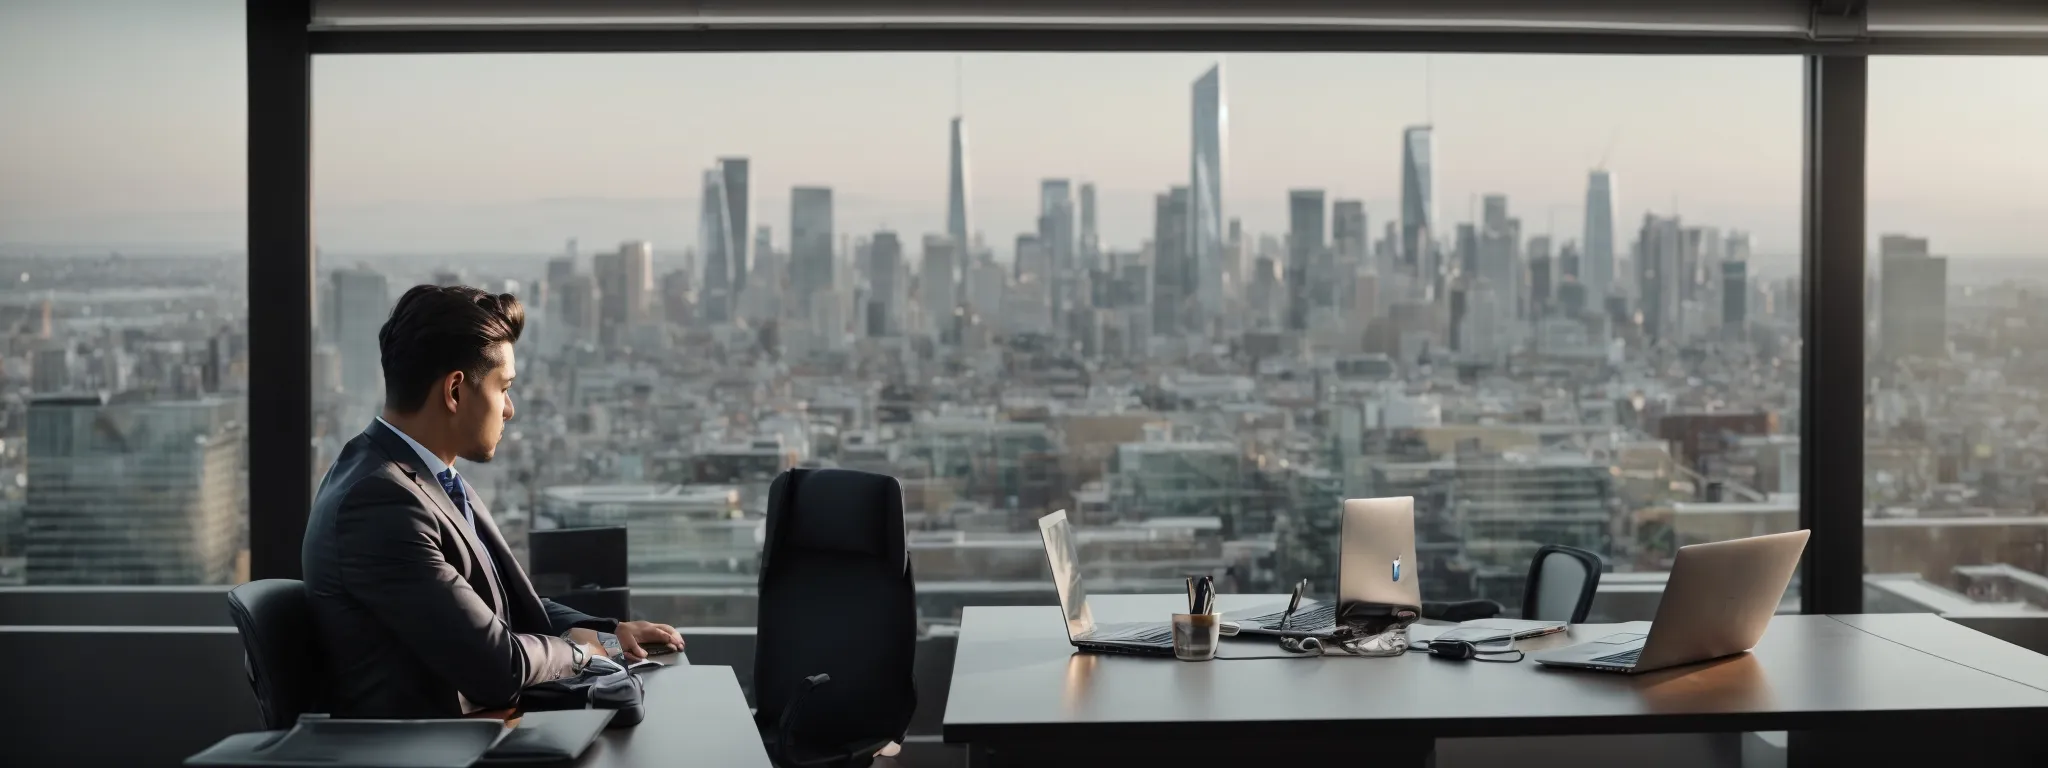 a businessperson uses a laptop to conduct seo research while sitting in a modern office with a panoramic view of the city skyline, symbolizing the reach and adaptability of digital marketing strategies.